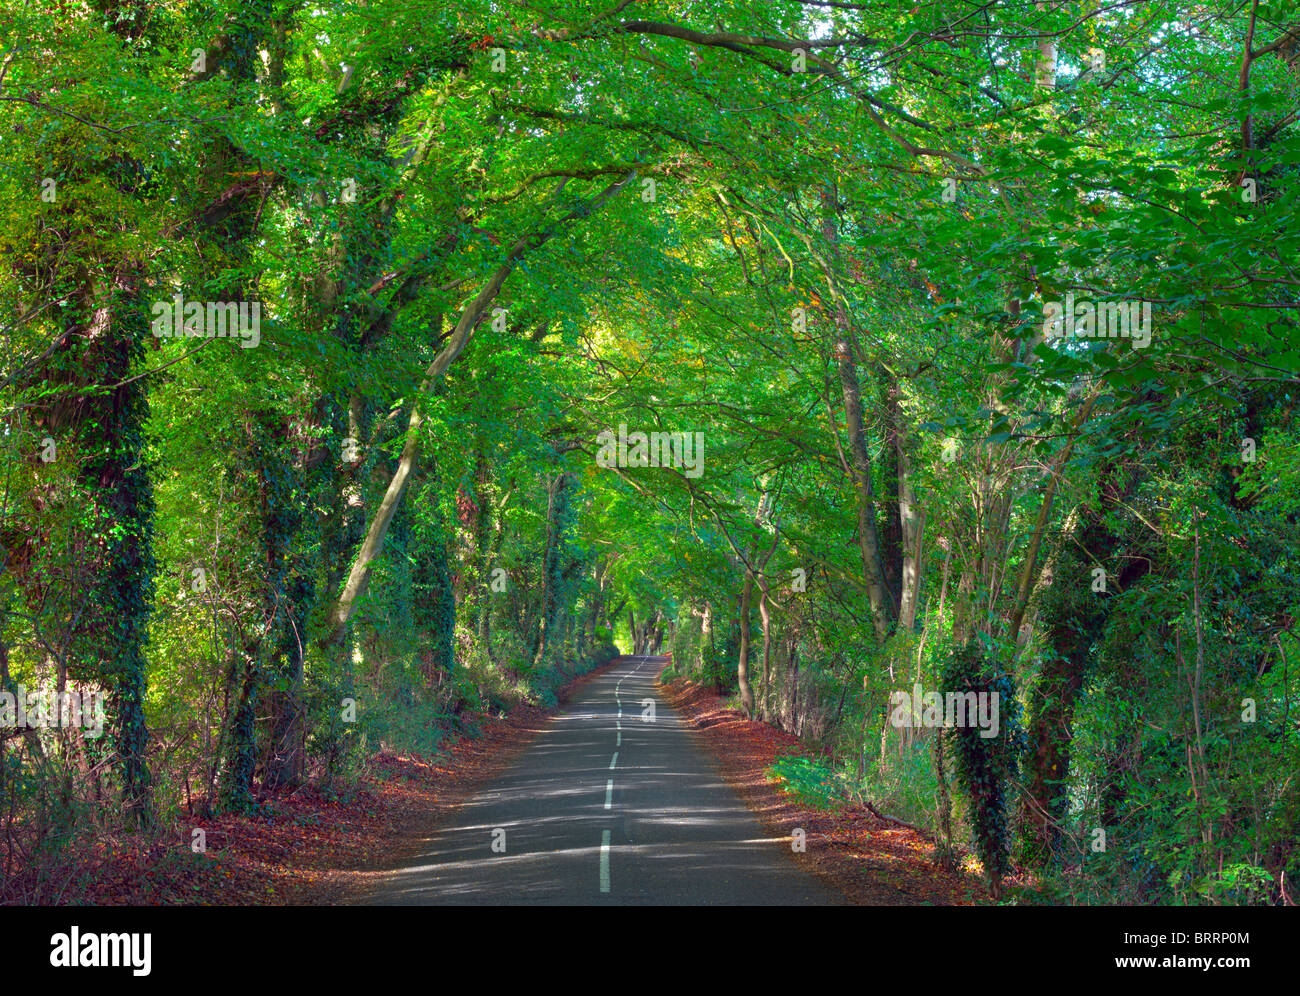 Green Leaf Tree Arch Covered Country Road Stock Photo